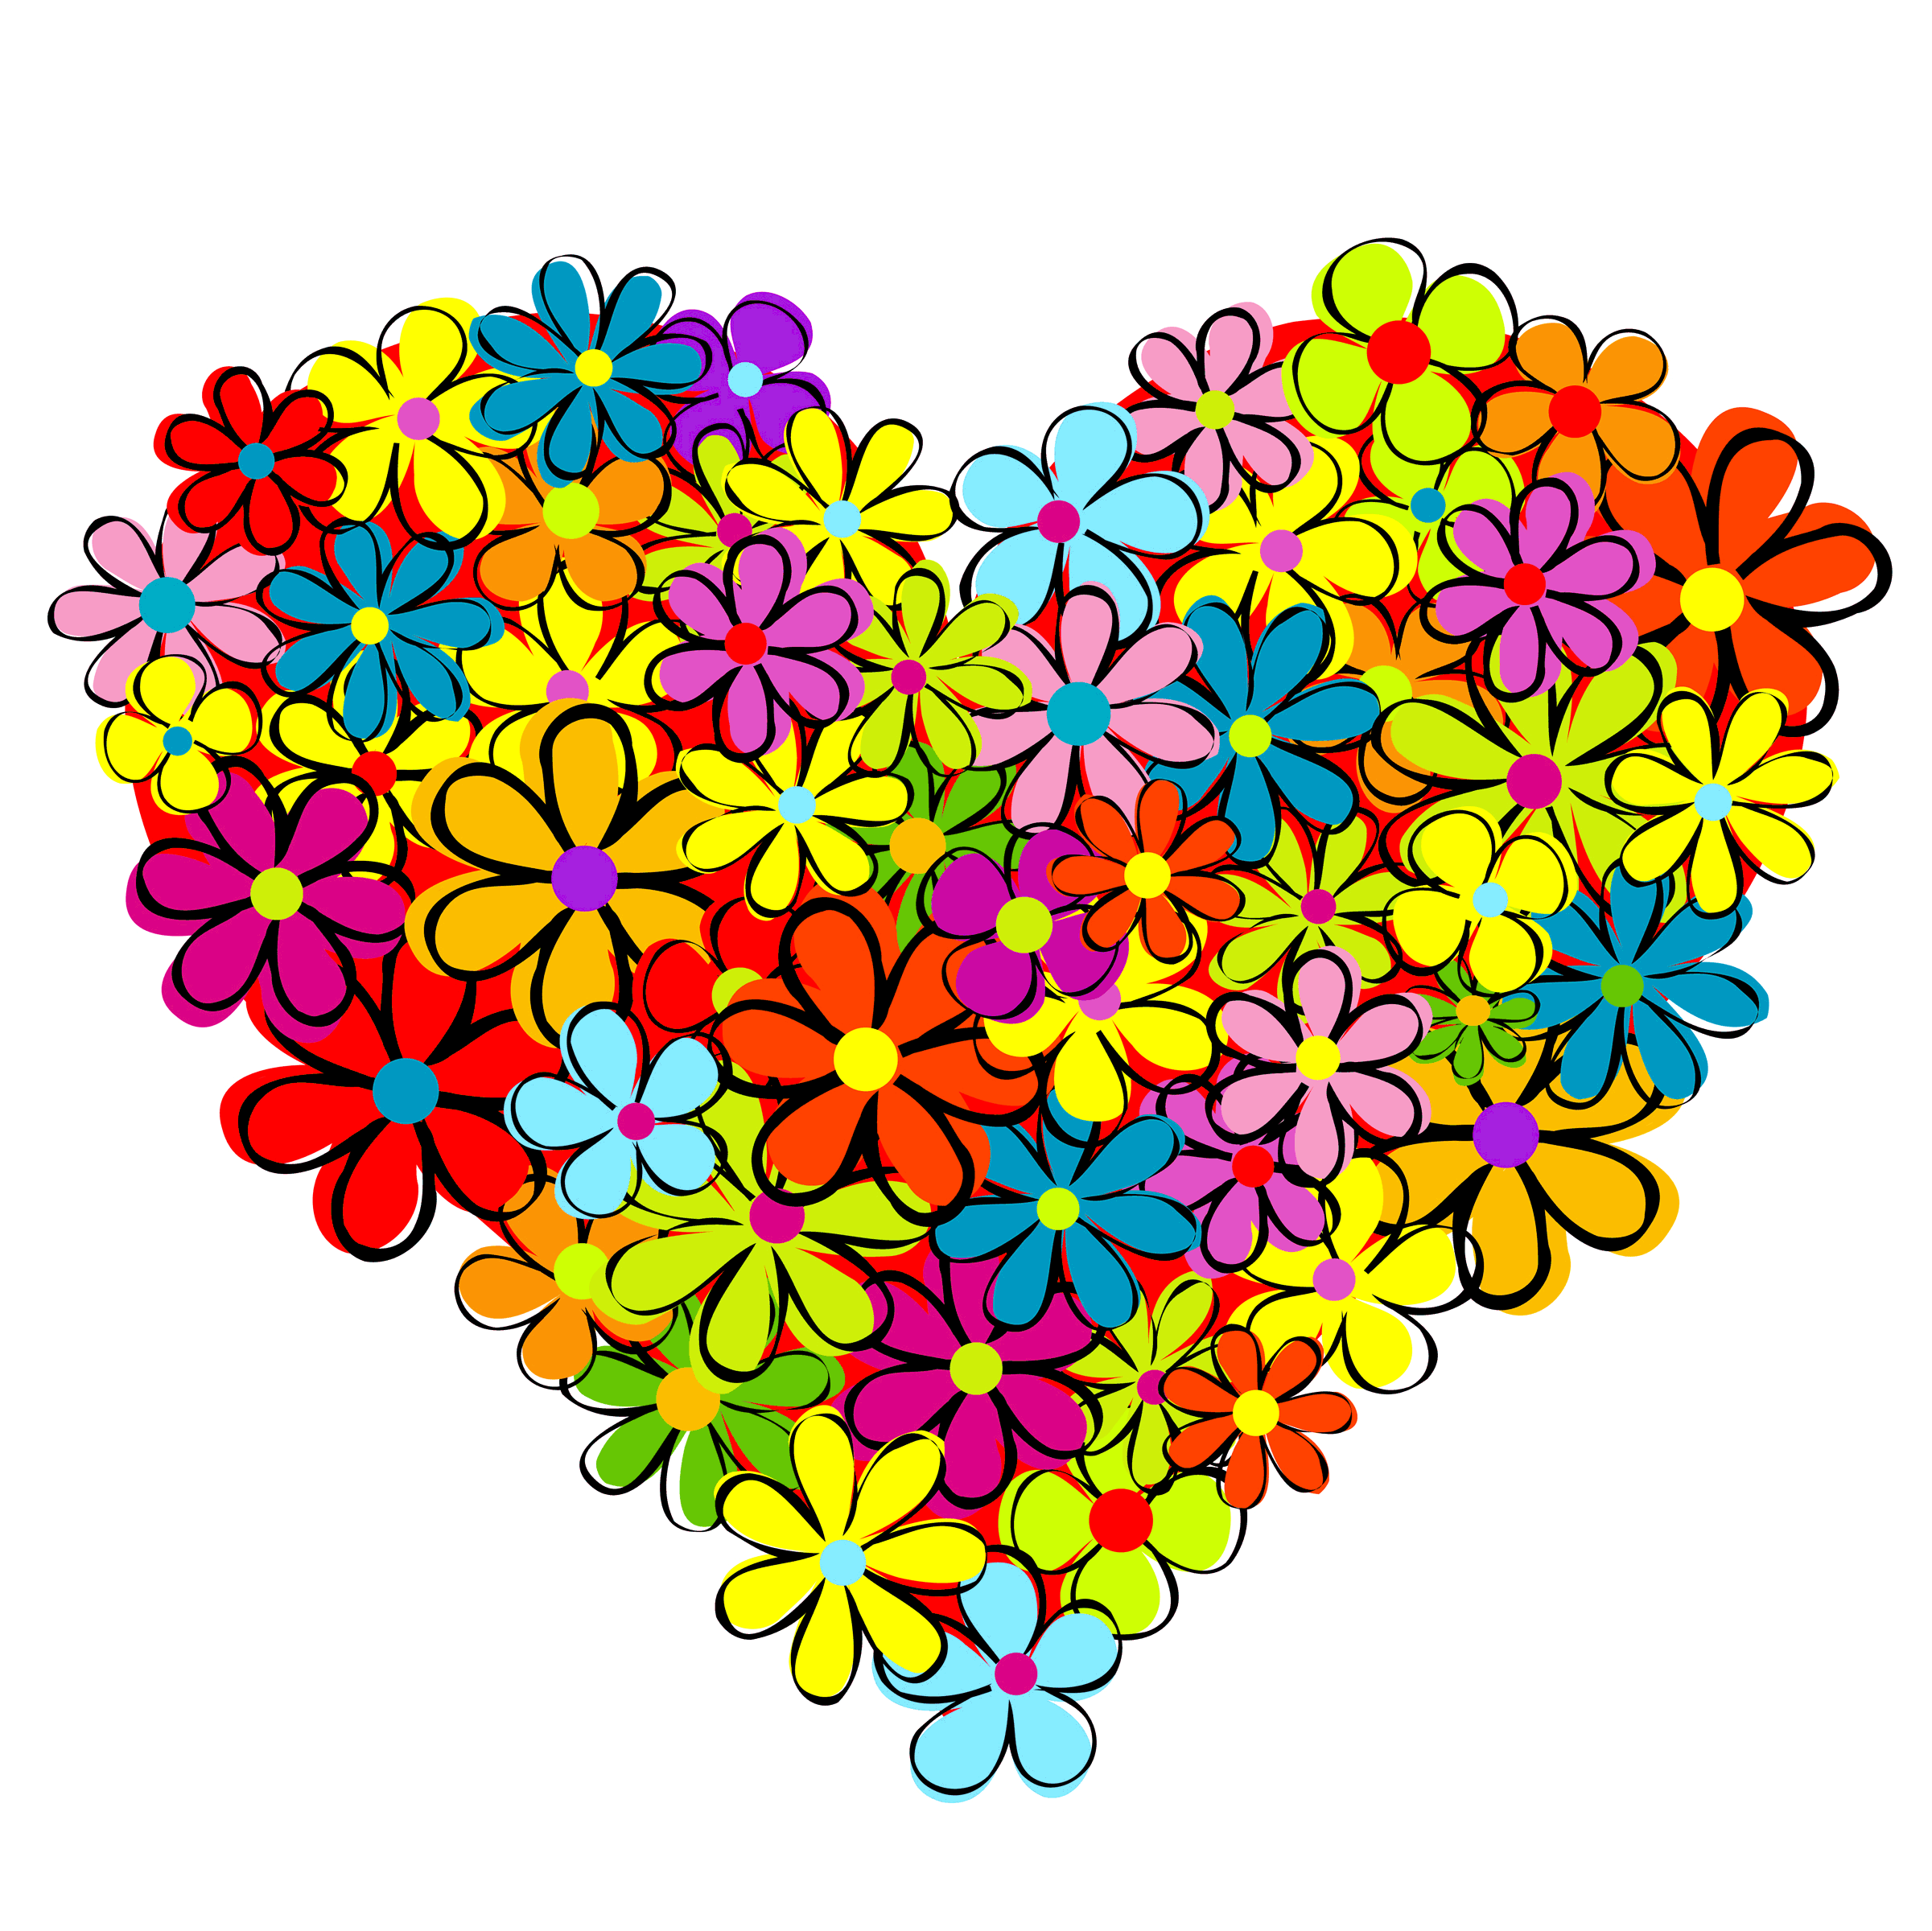 Flower Drawings With Color Hd Cool 7 HD Wallpapers | lzamgs.